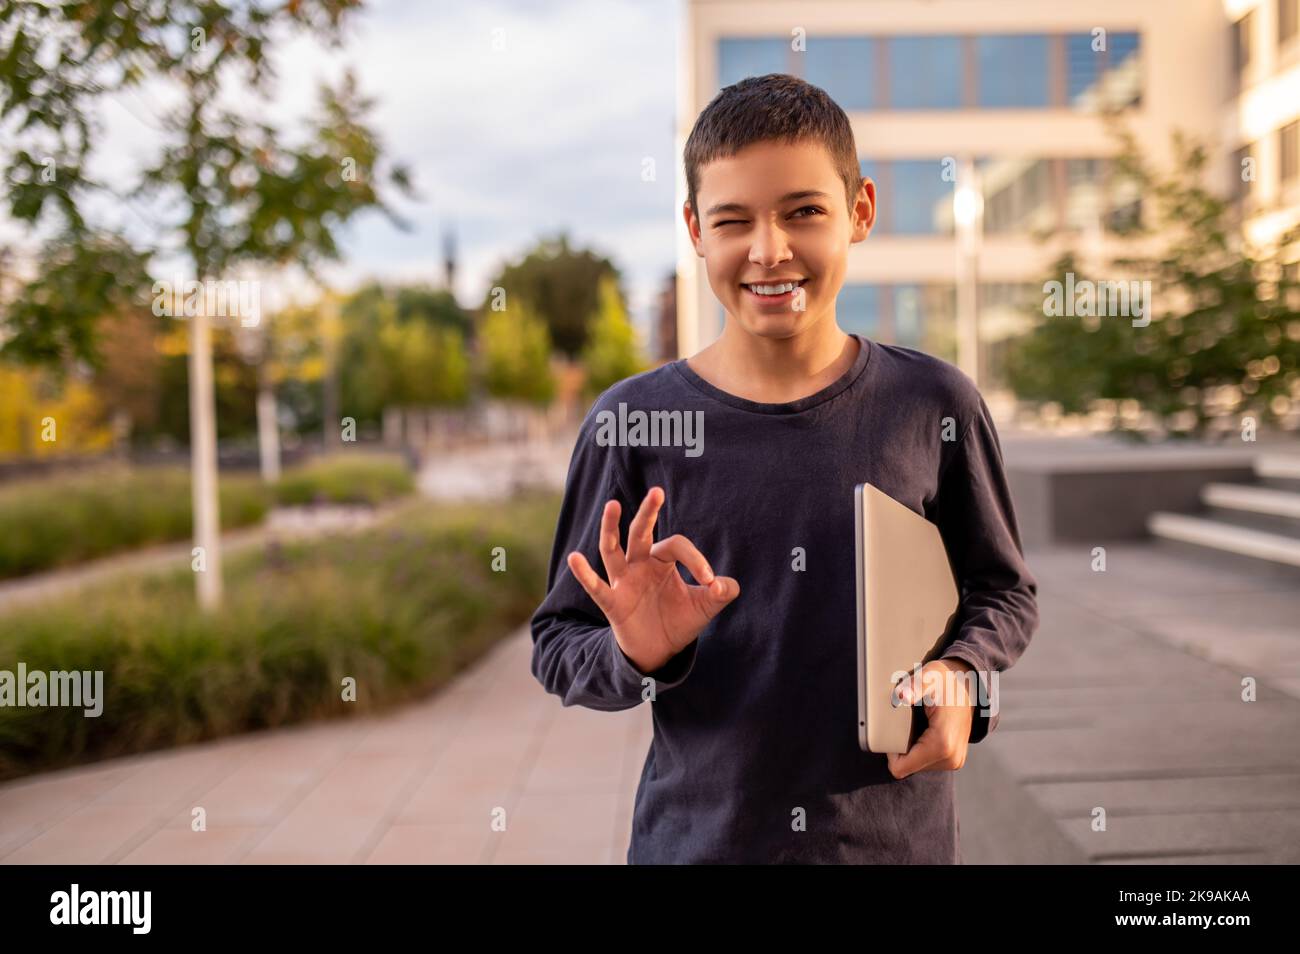 Teen showing a hand gesture and smiling at somebody outdoors Stock Photo